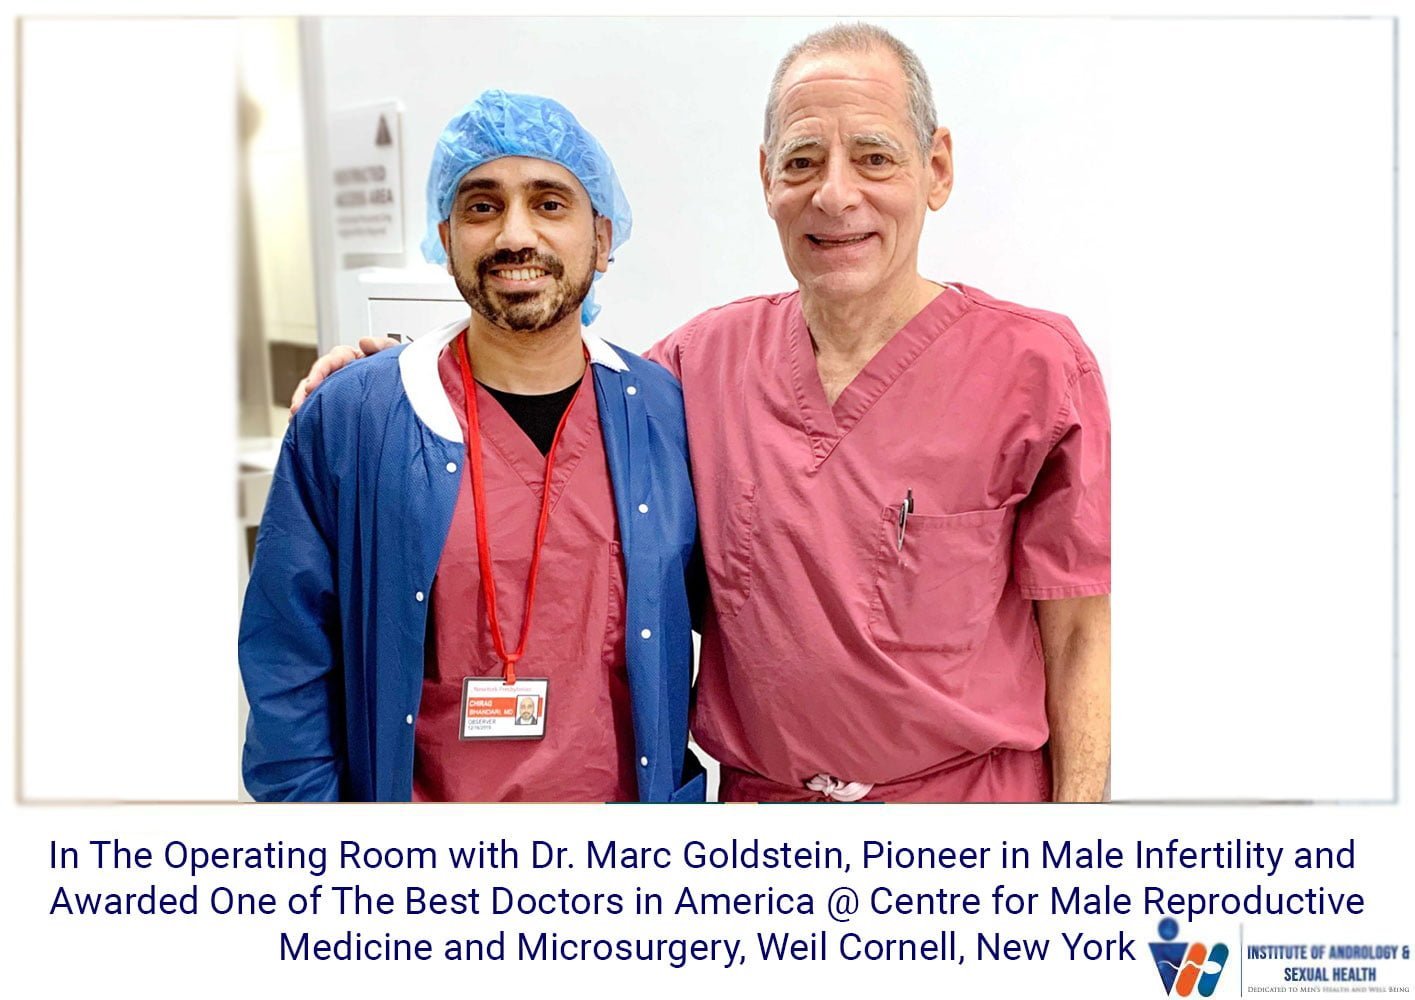 In the operation room with Dr. Marc Goldstein, Pioneer in Male Infertility and Awarded one of the best doctors in America at centre for male reproductive medicine and microsurgery, Weil Cornell, New York